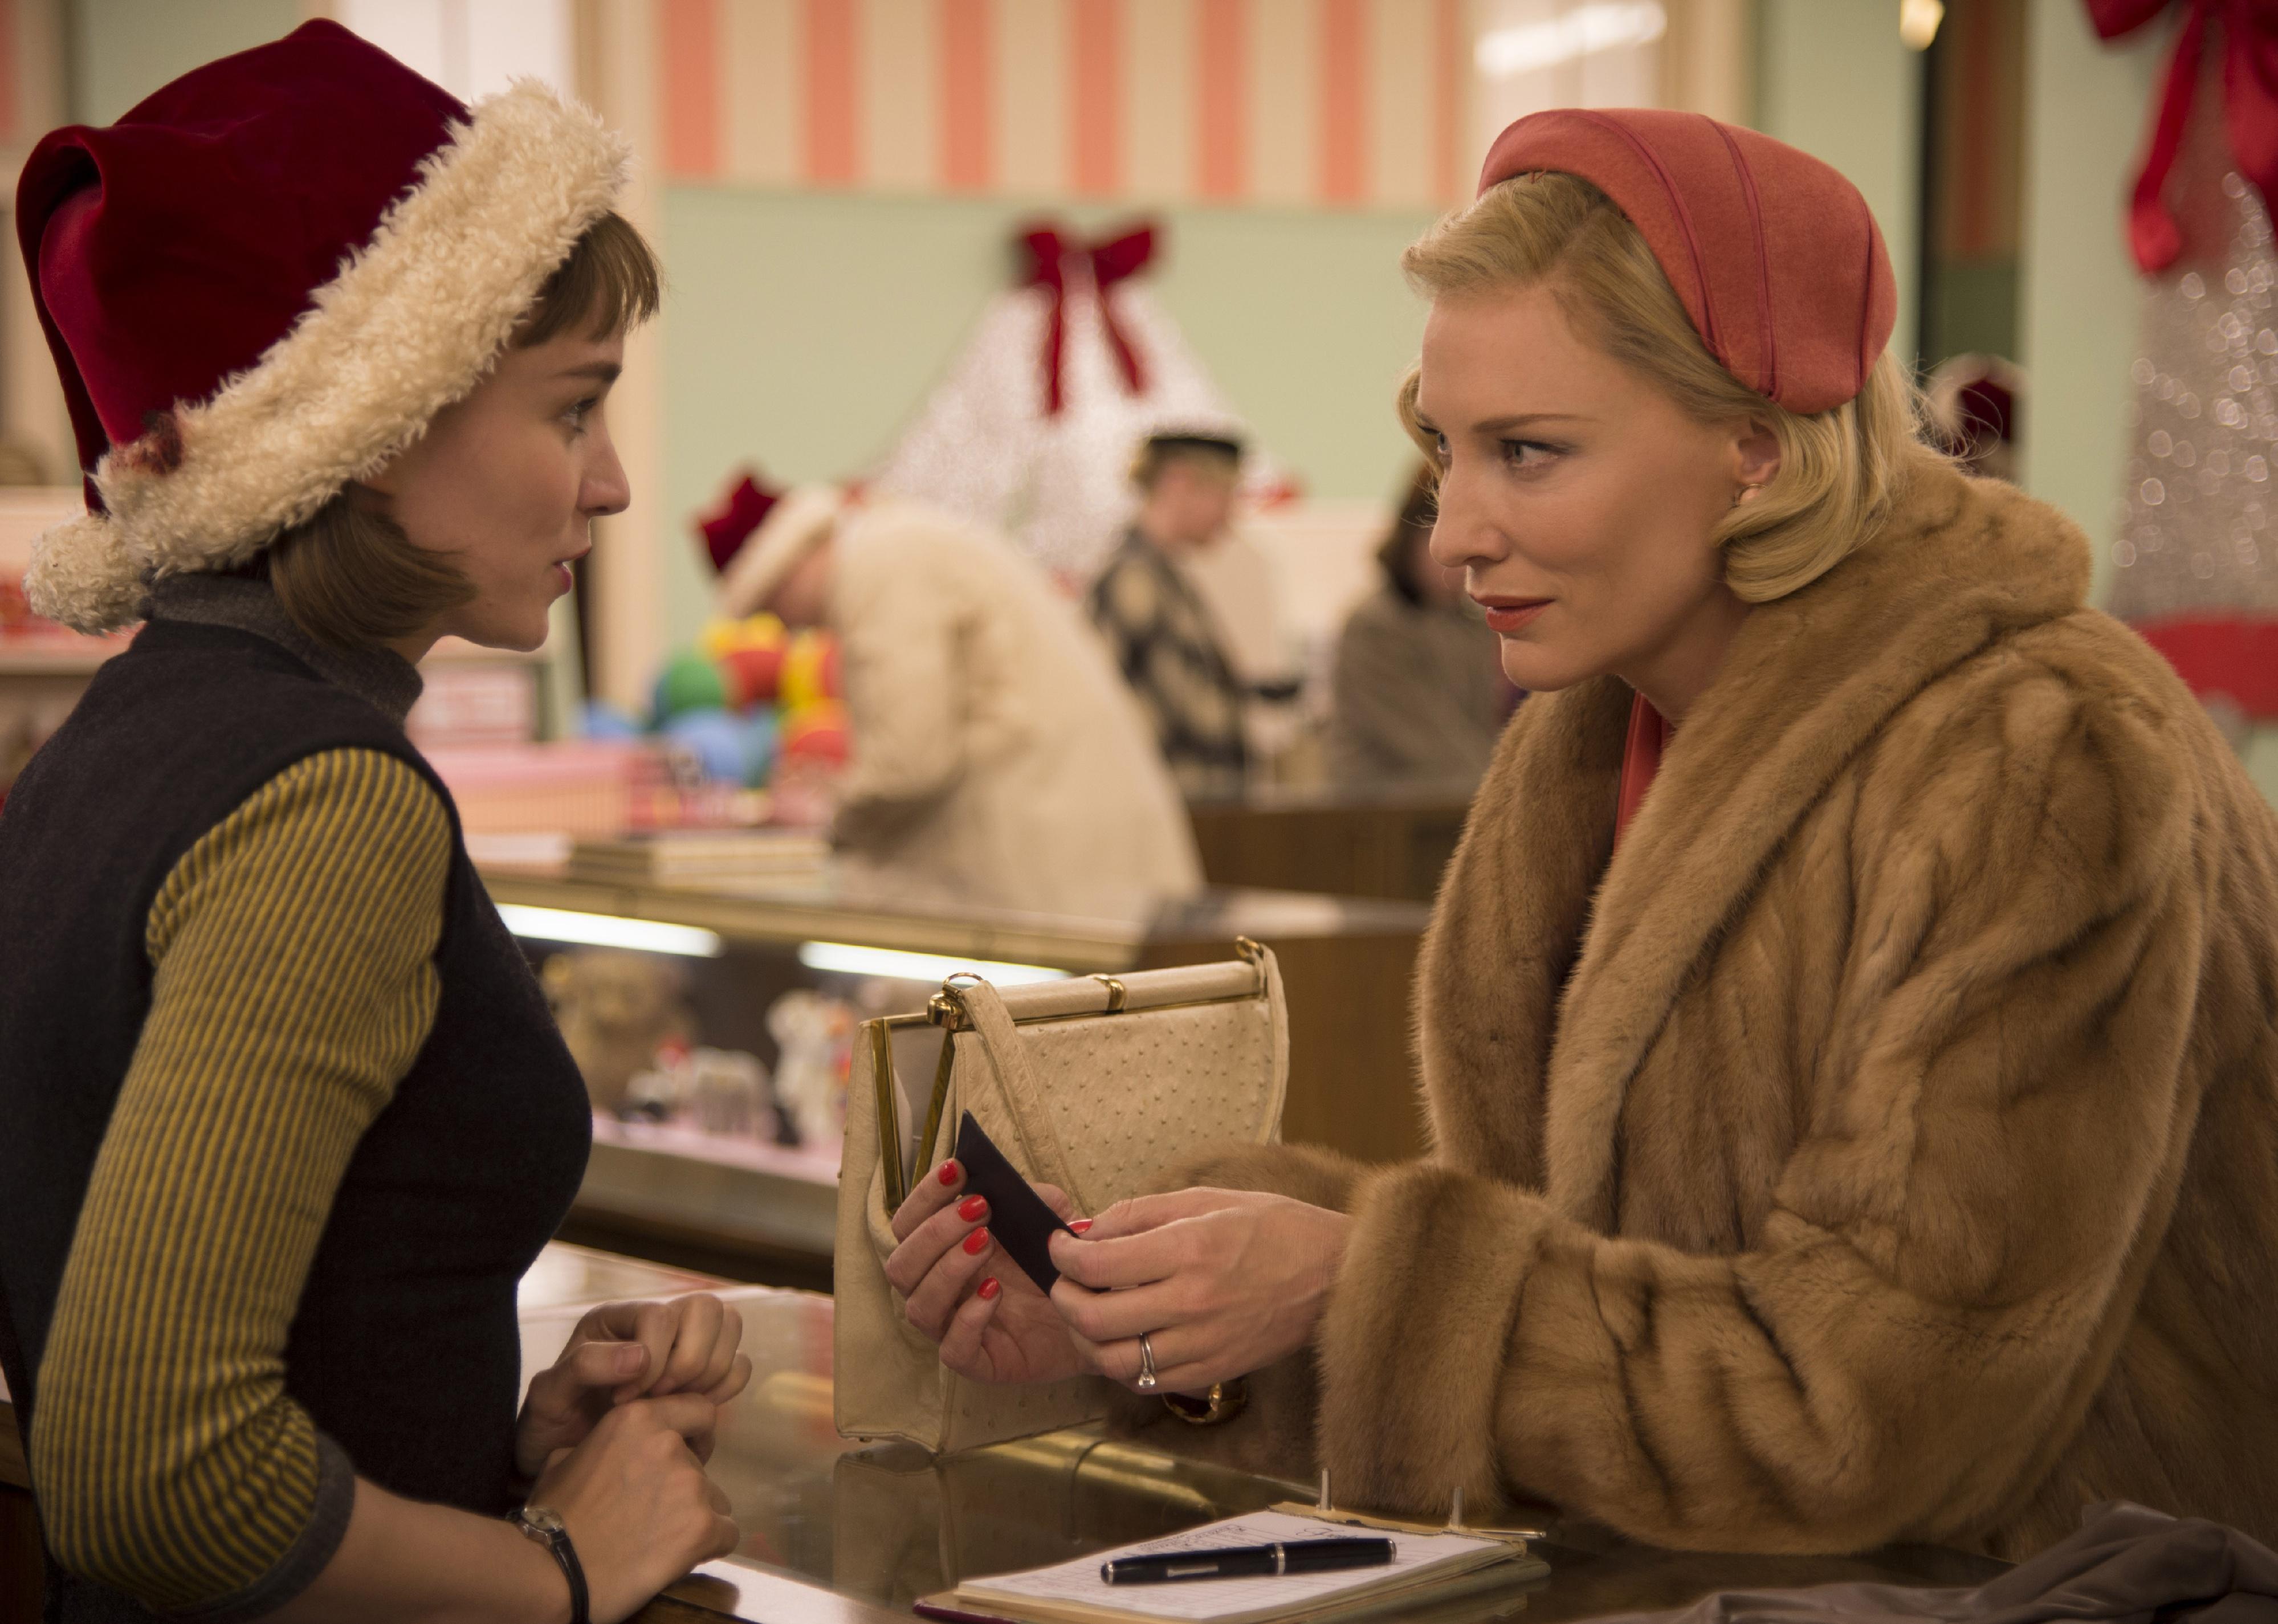 Cate Blanchett and Rooney Mara talking over a department store counter on Christmas.